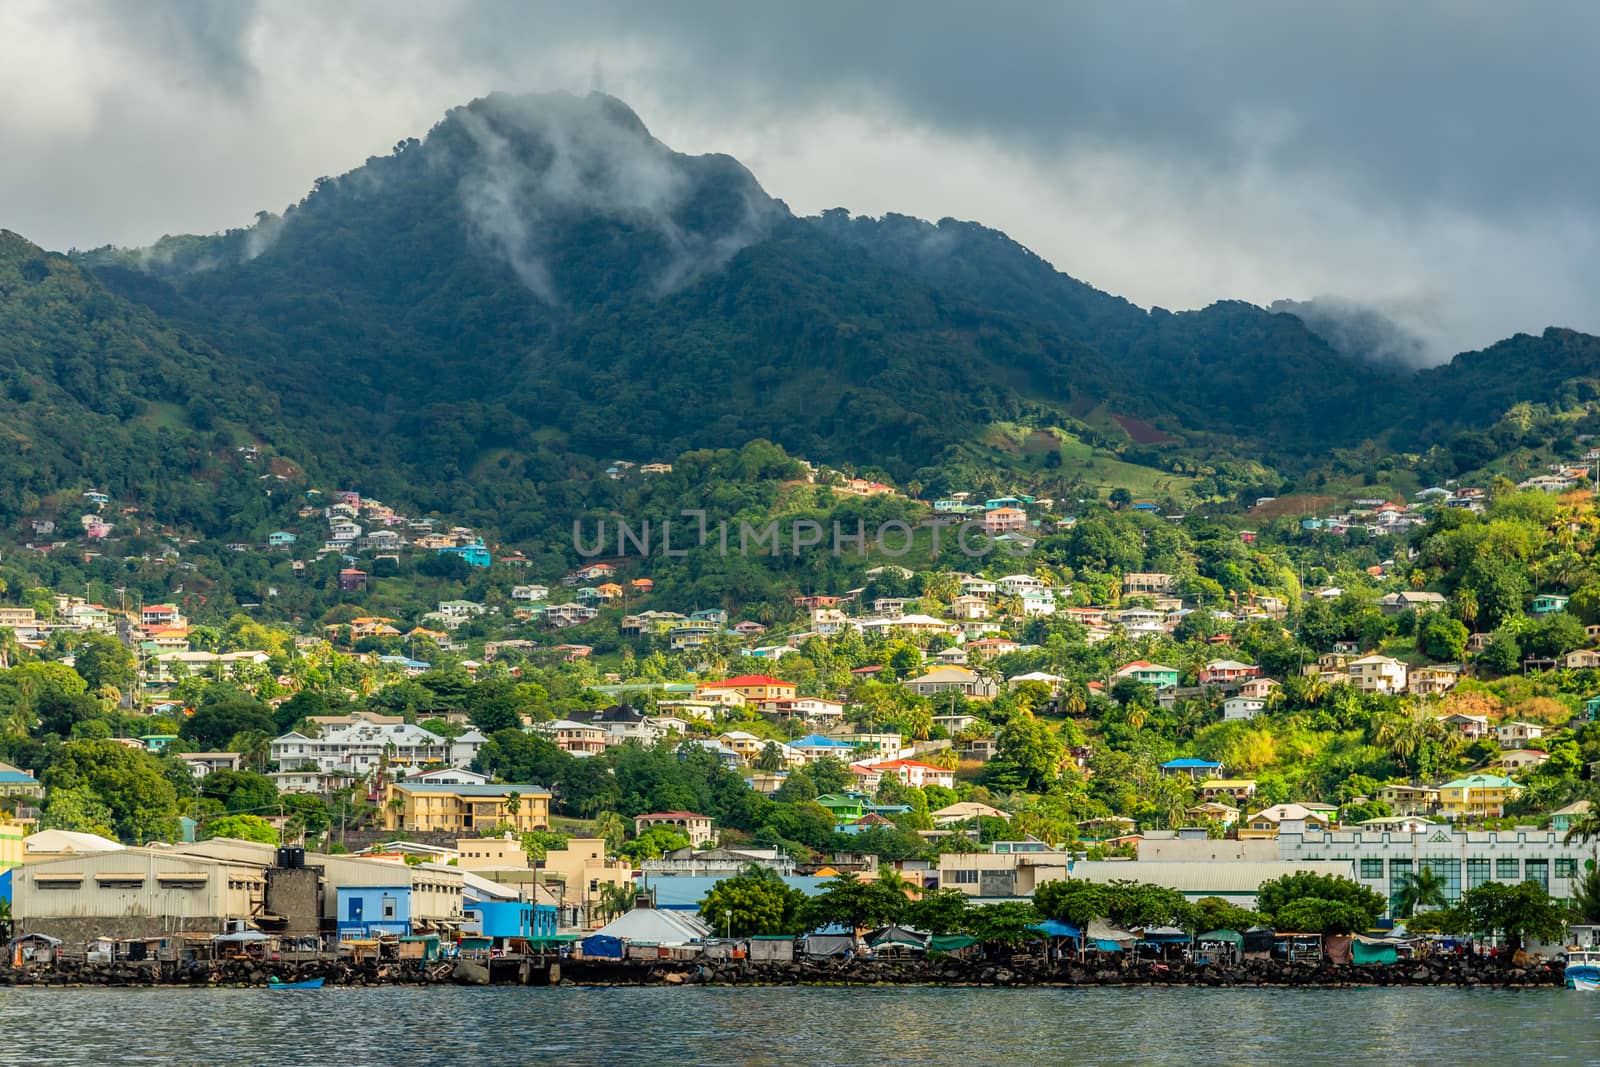 Coastline view with lots of living houses on the hill, Kingstown, Saint Vincent and the Grenadines